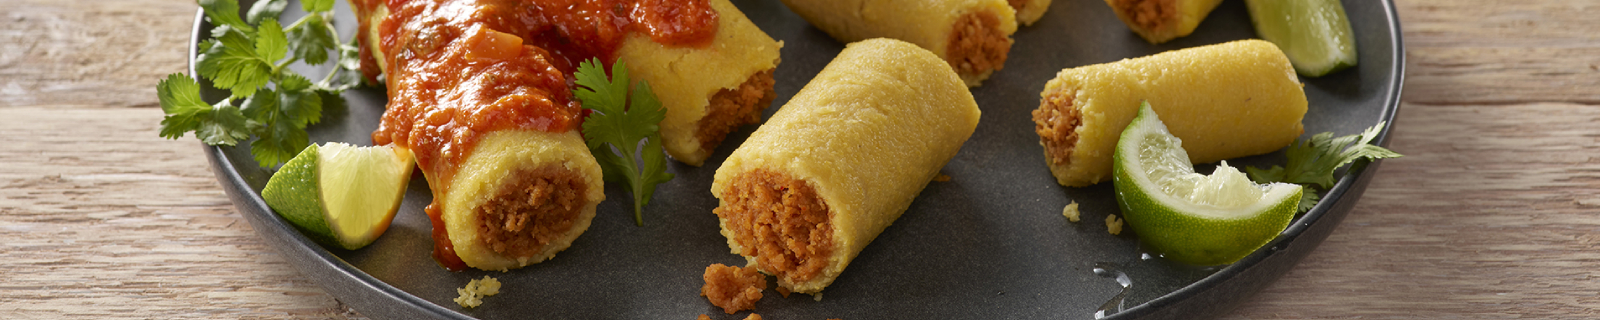 Poblano Pepper and Cheese Tamale